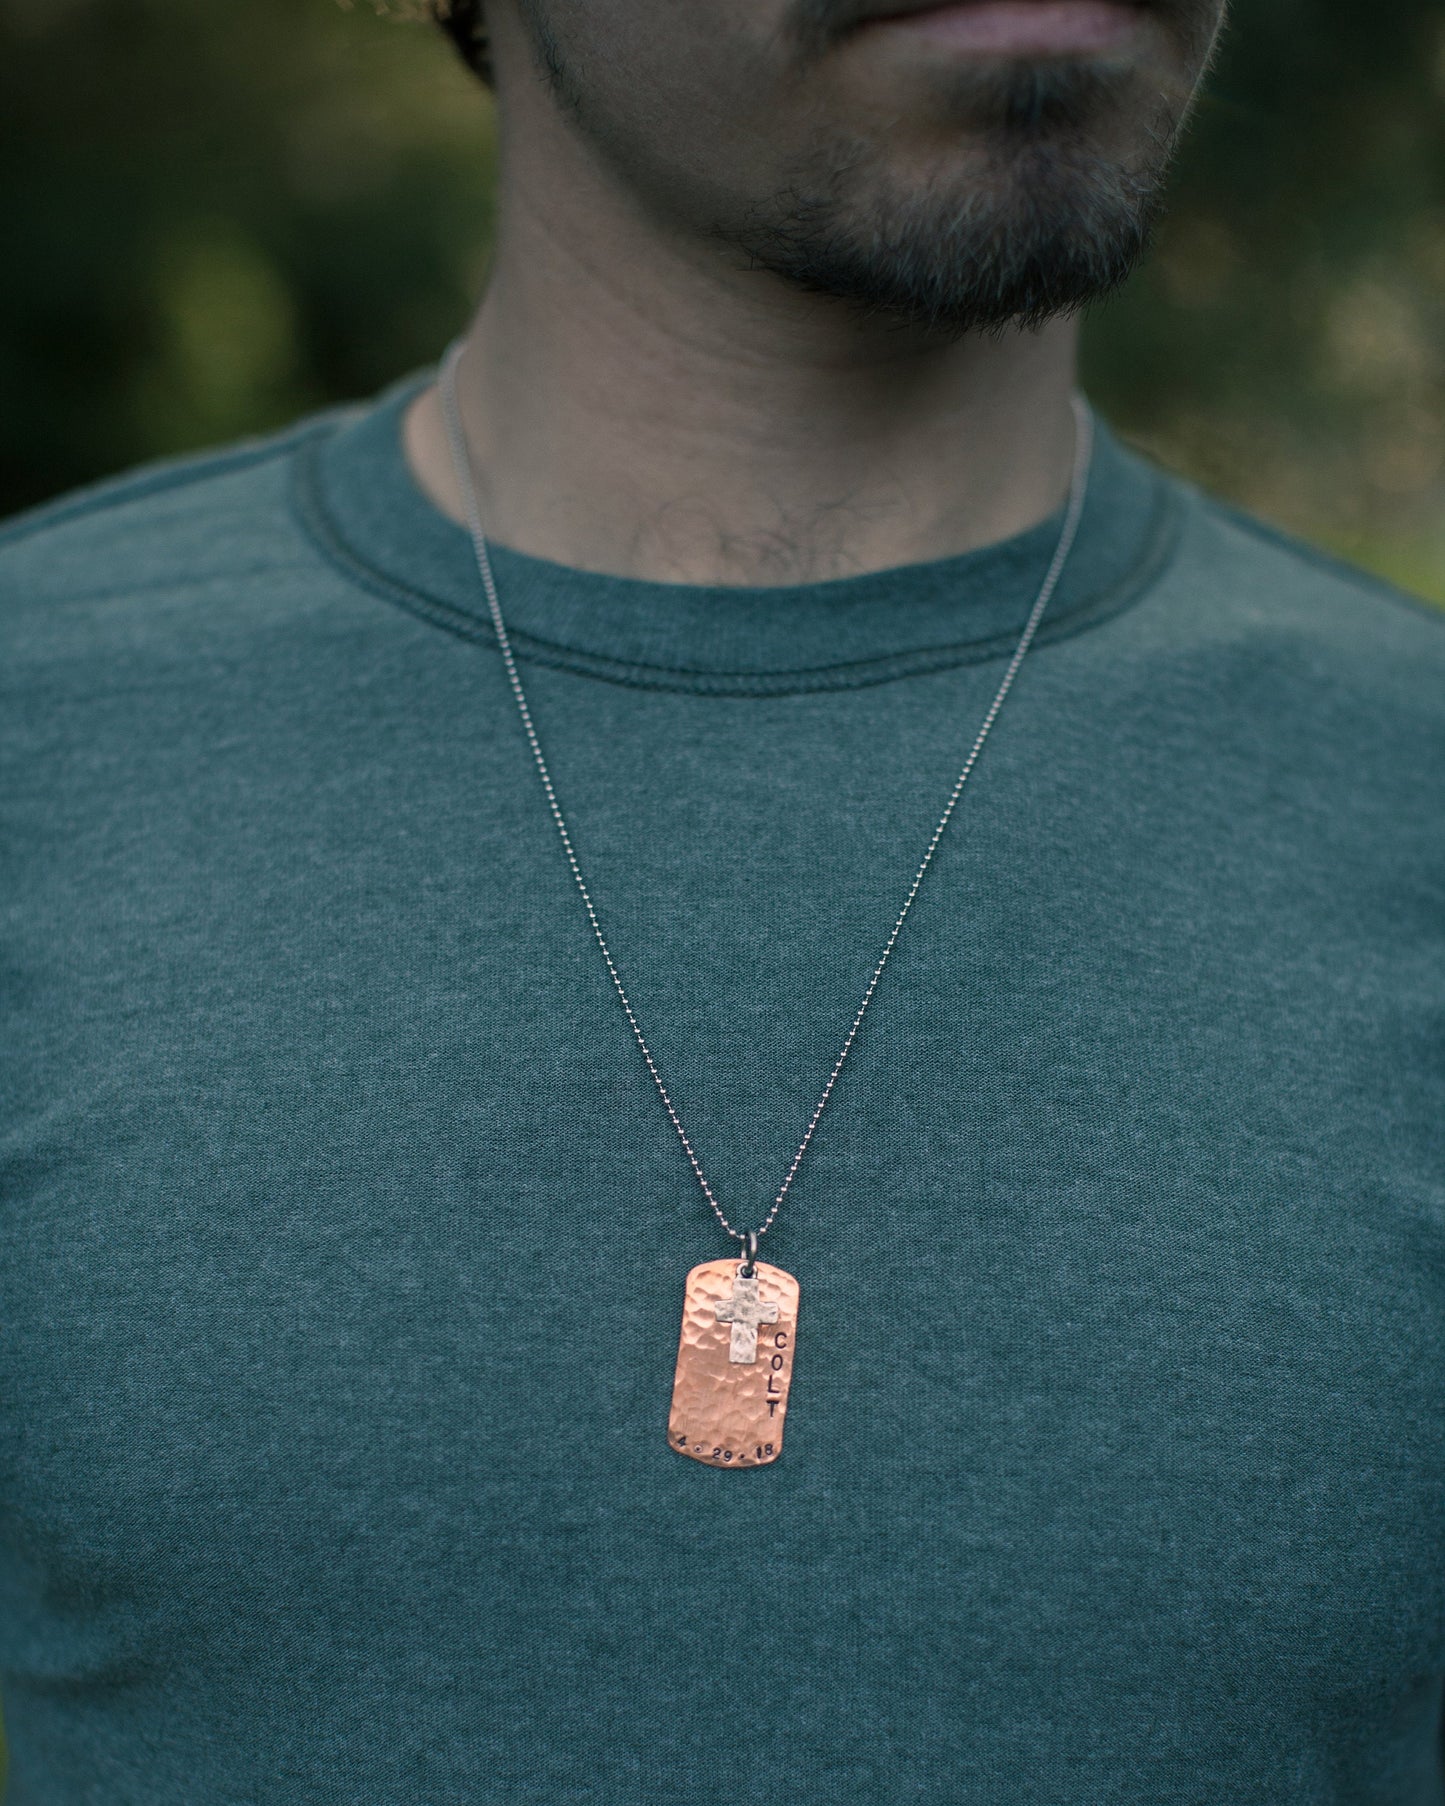 Boys Dog Tag Necklace, Boys Copper Initial Dog Tag Jewelry Gift, Copper Dog Tag Necklace for Boys, Personalized Simple Masculine Necklace